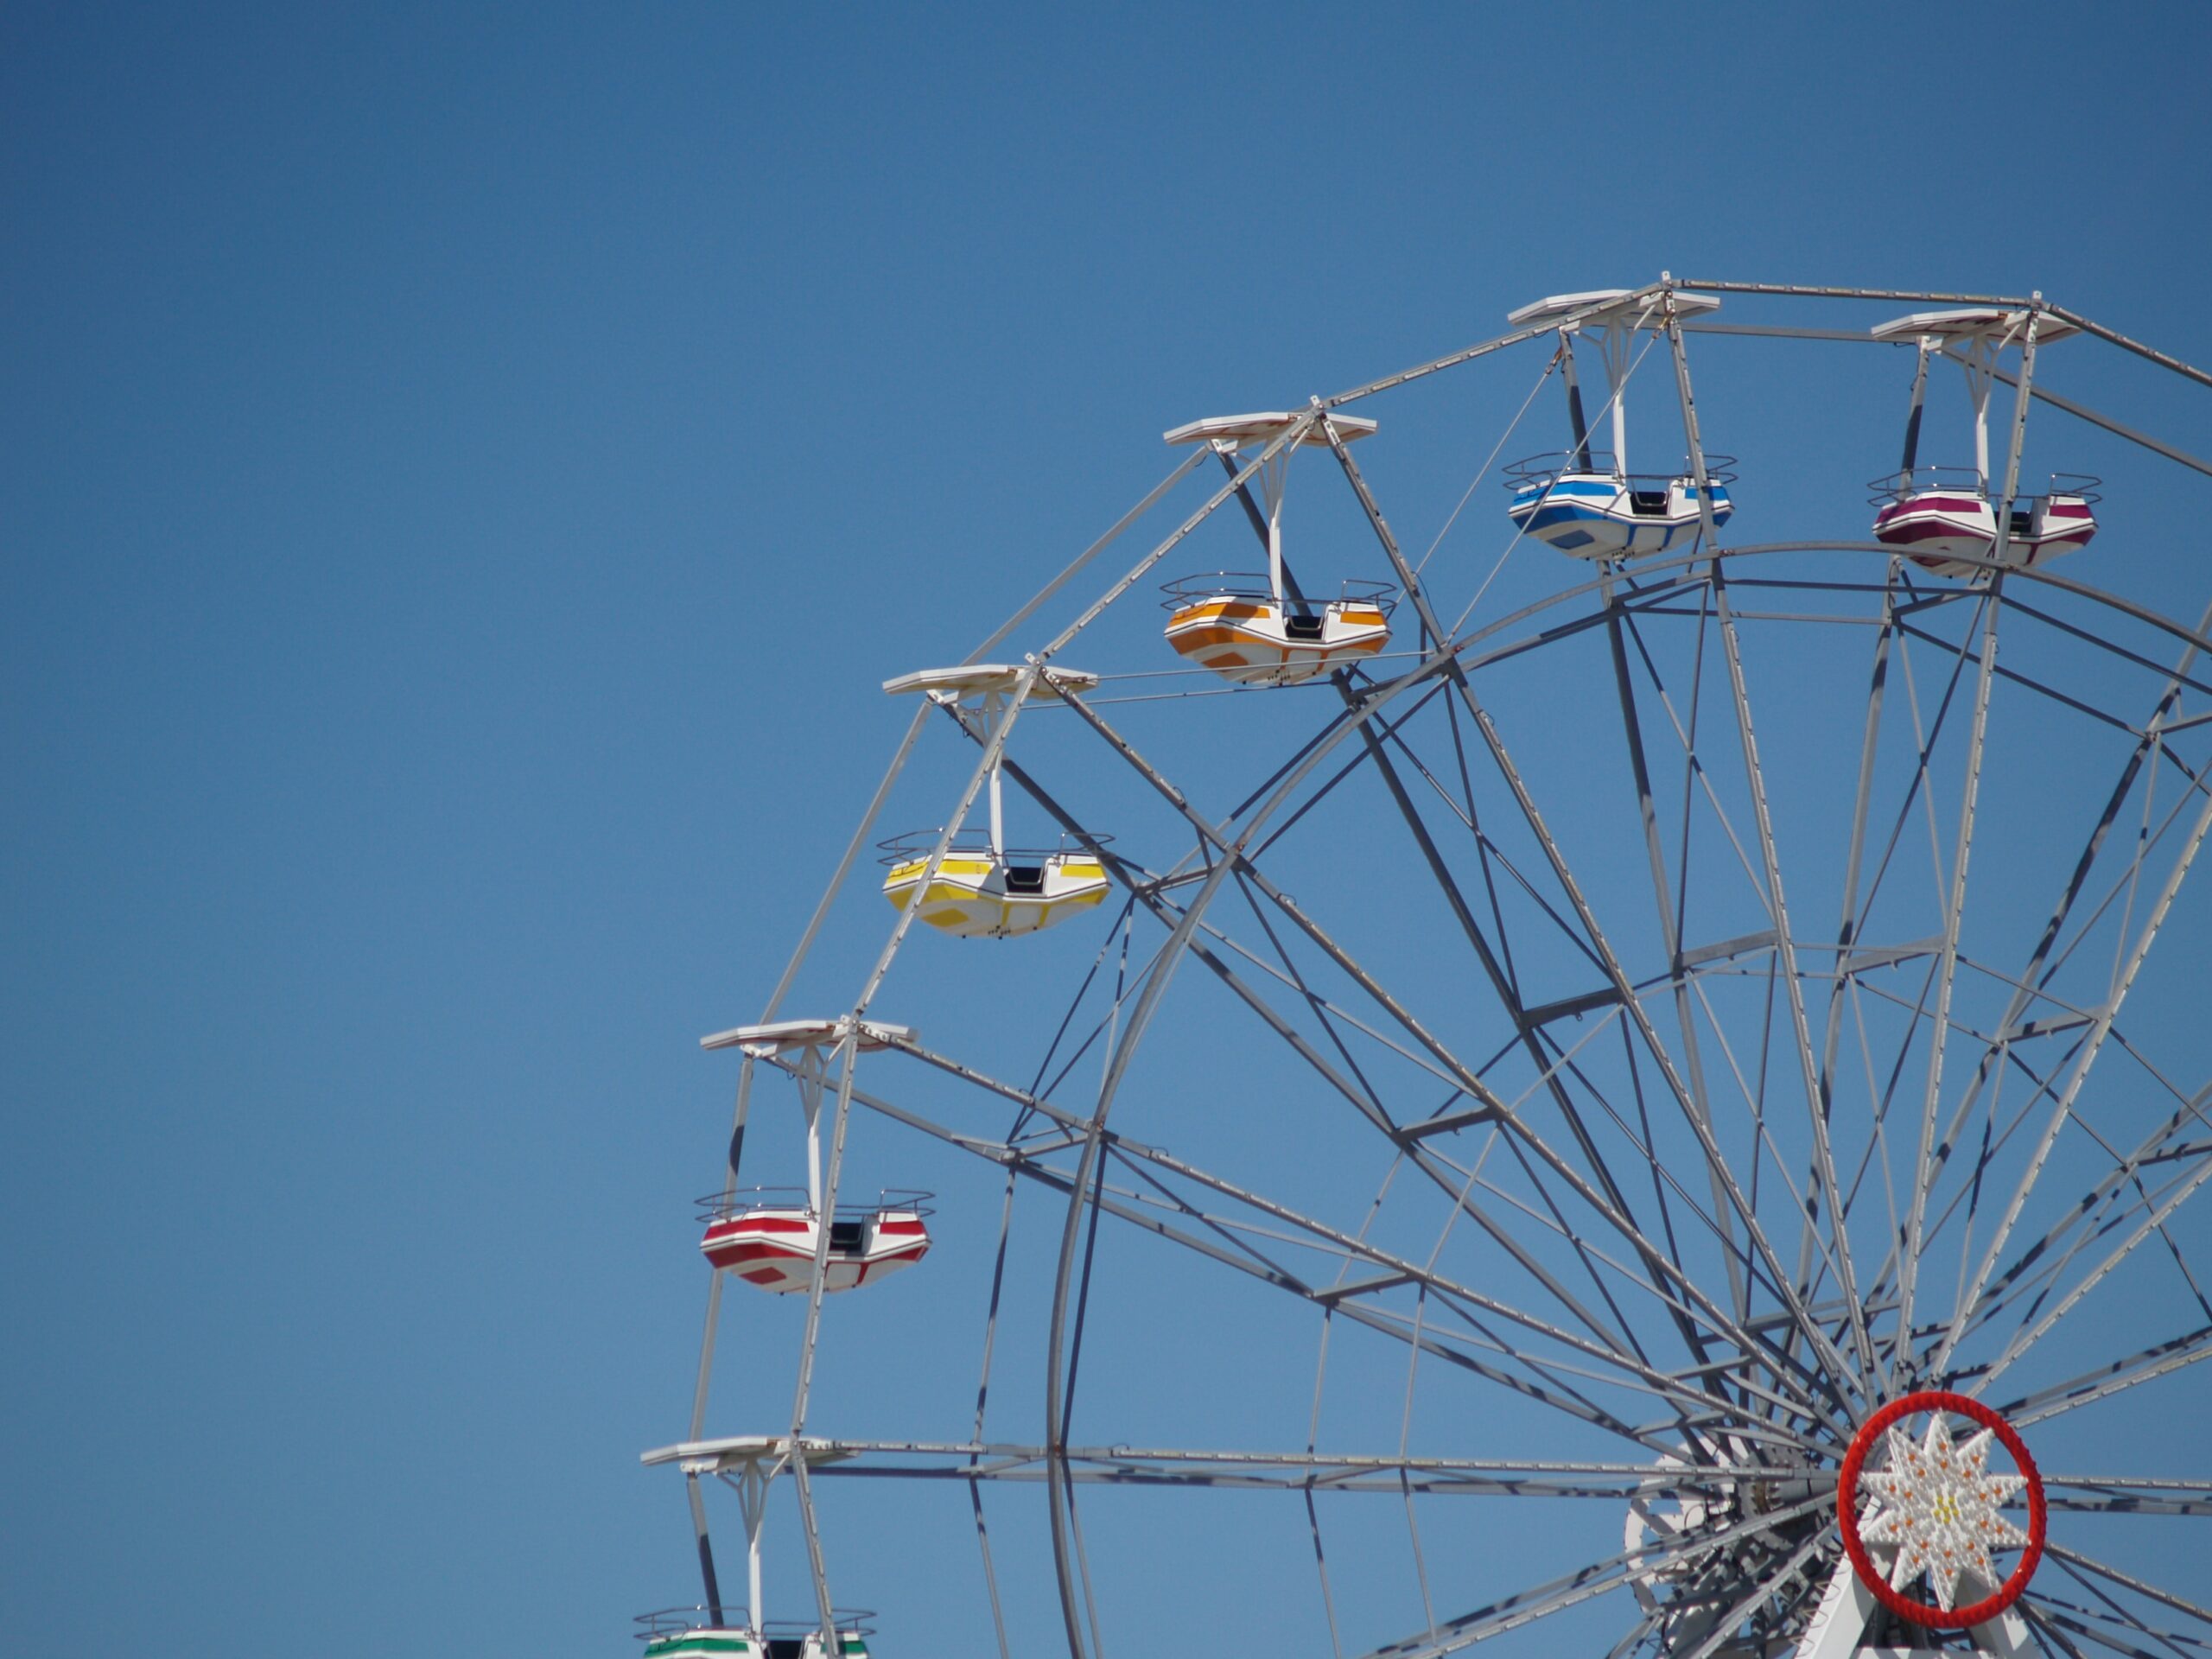 For beachfront living and relaxation, Oceanfront is one of the best places to live in New Jersey. Pictured: A ferris wheel in Ocean City